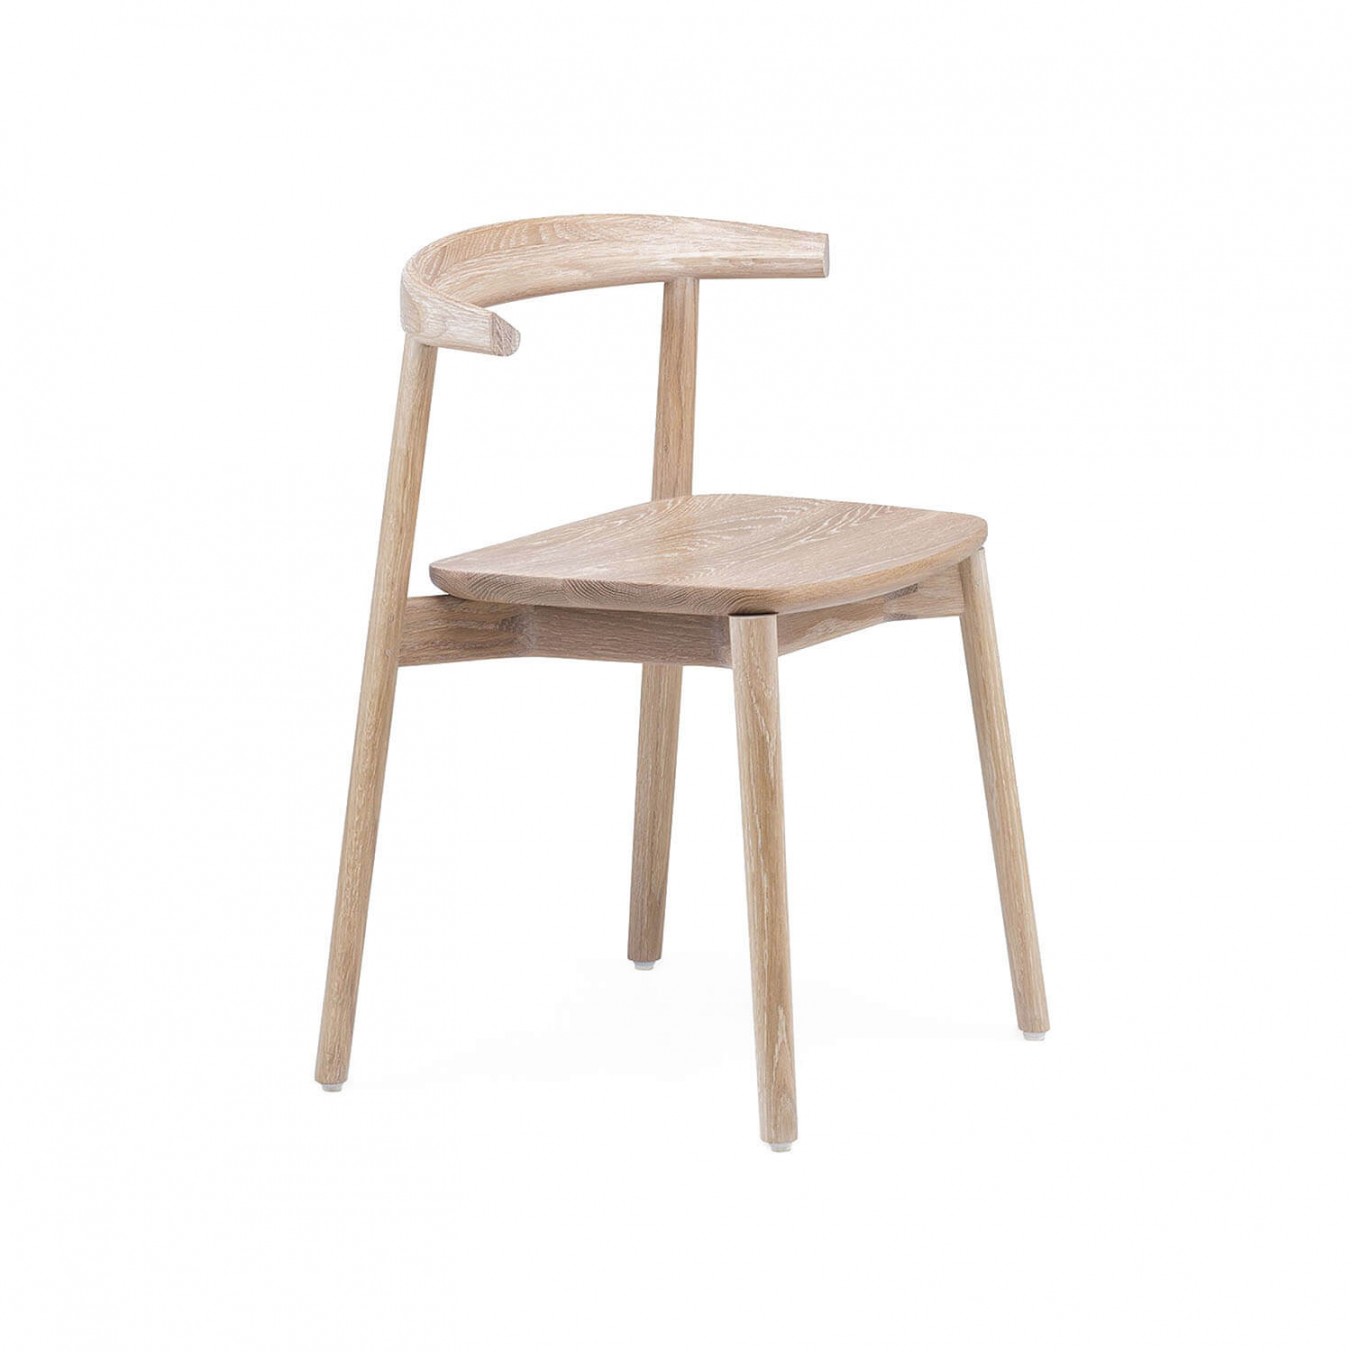 ANDO CHAIR